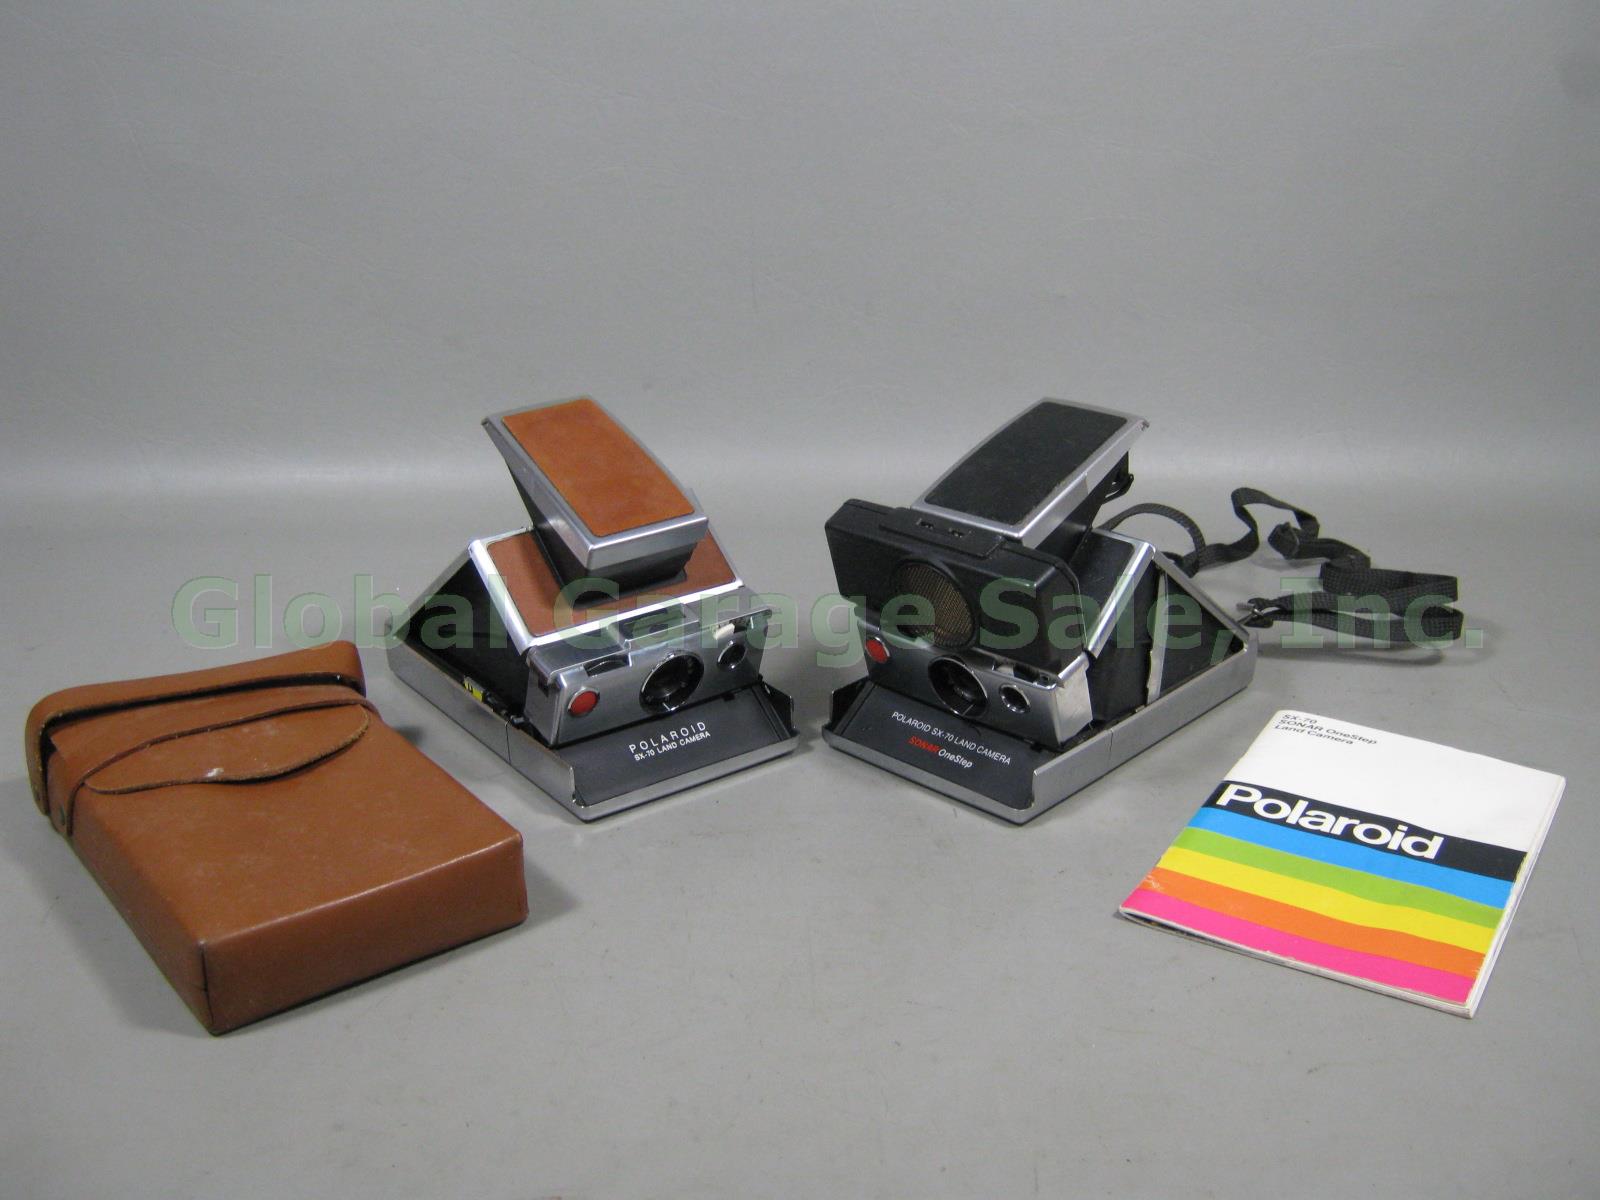 Vtg Polaroid SX-70 Land Camera W/ Leather Case Sonar OneStep + Owners Manual Lot